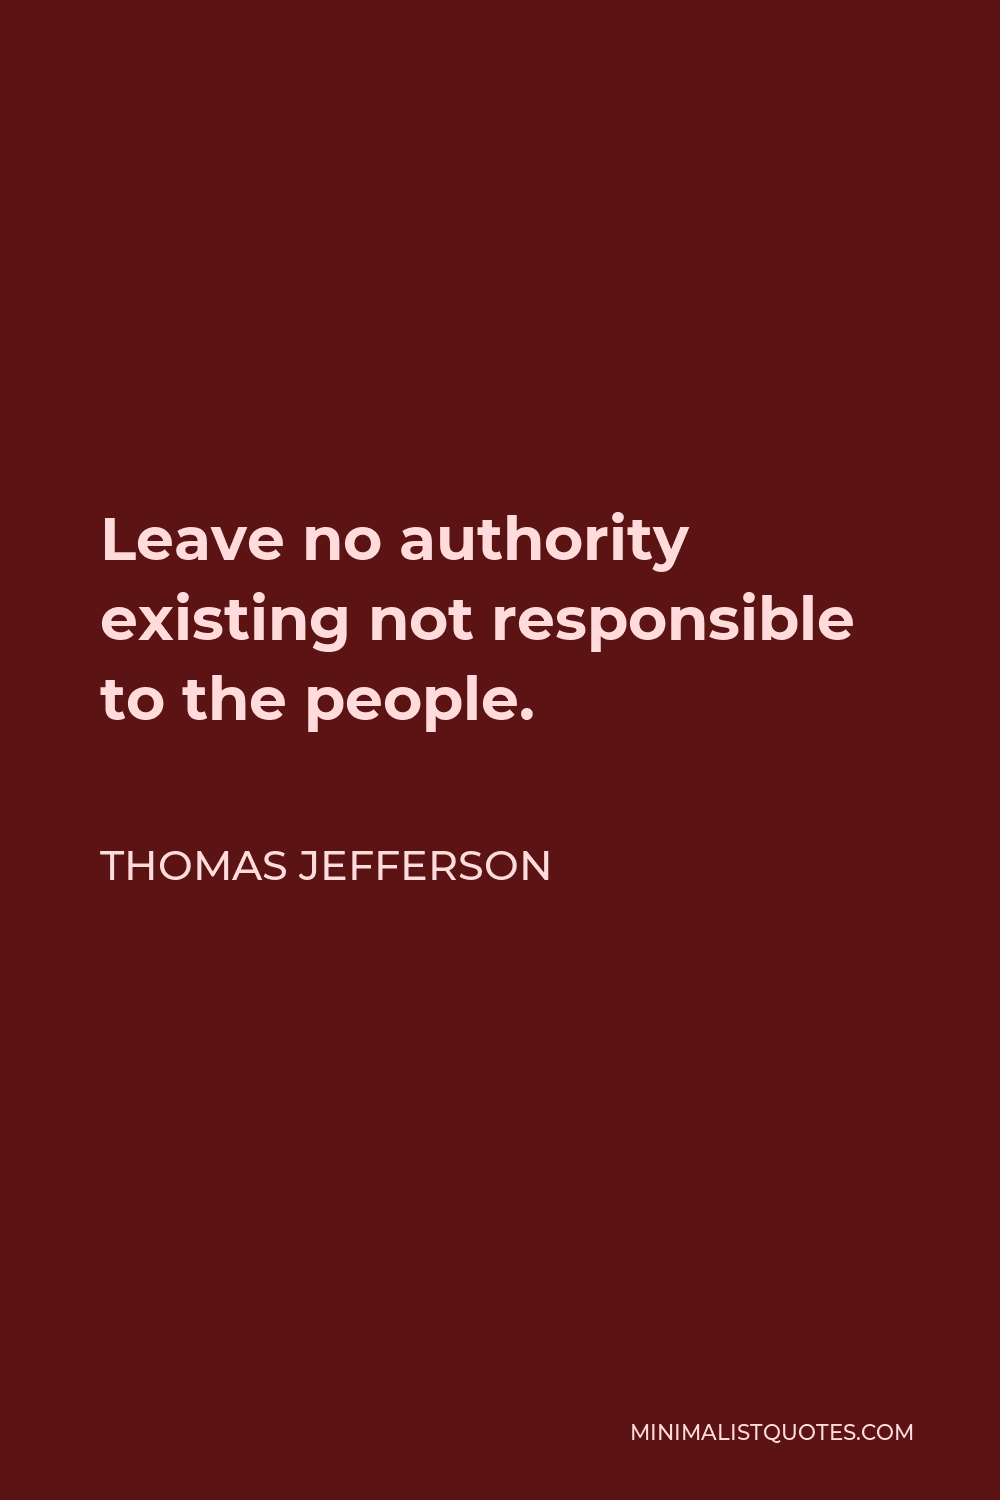 Thomas Jefferson Quote - Leave no authority existing not responsible to the people.